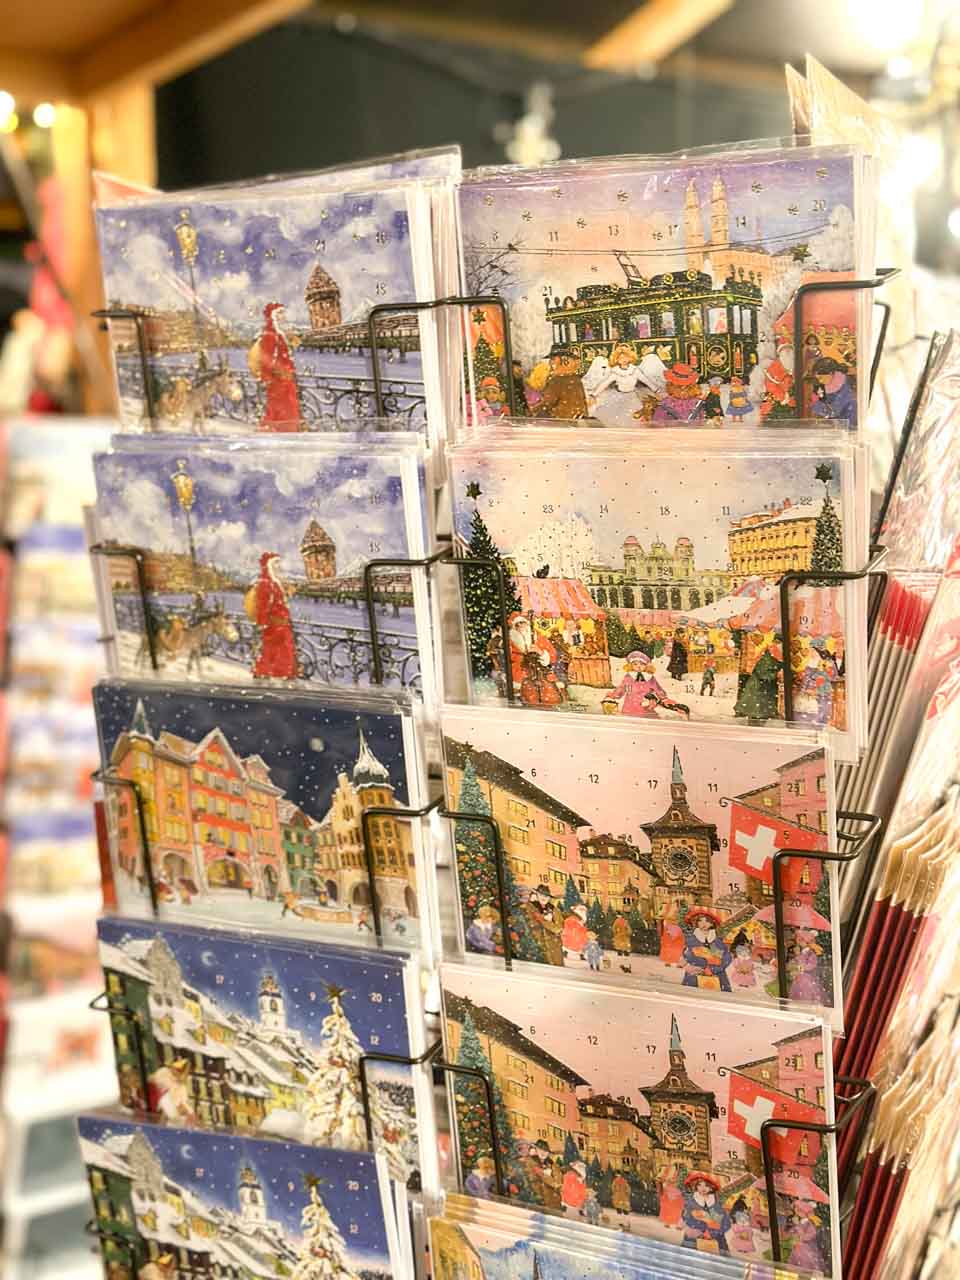 A selection of colourful Christmas postcards on display at the Münsterplatz Christmas market in Basel